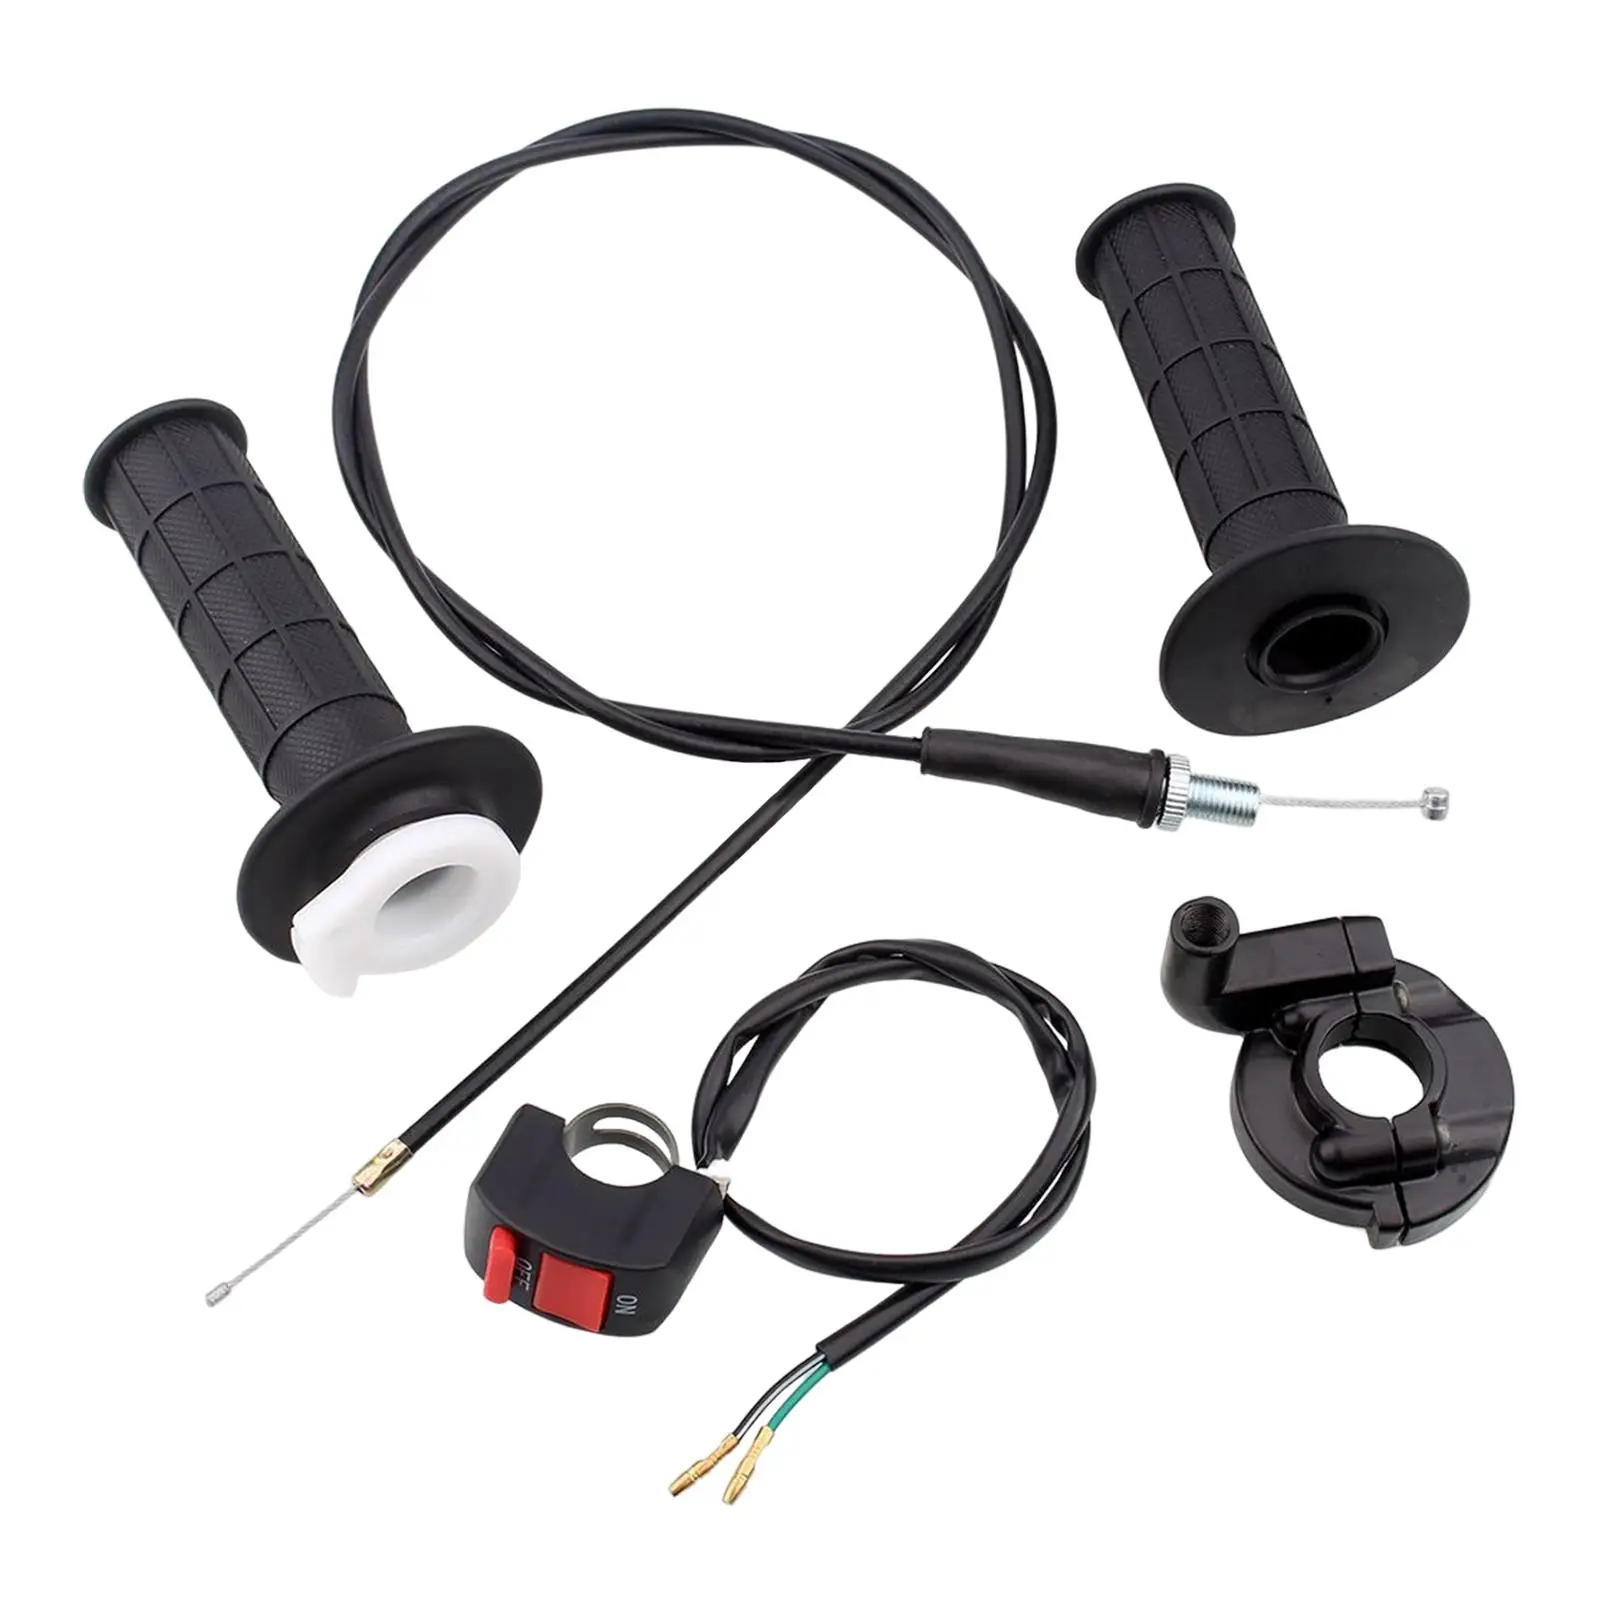 Throttle Accelerator Handle and Cable Kit for 7/8